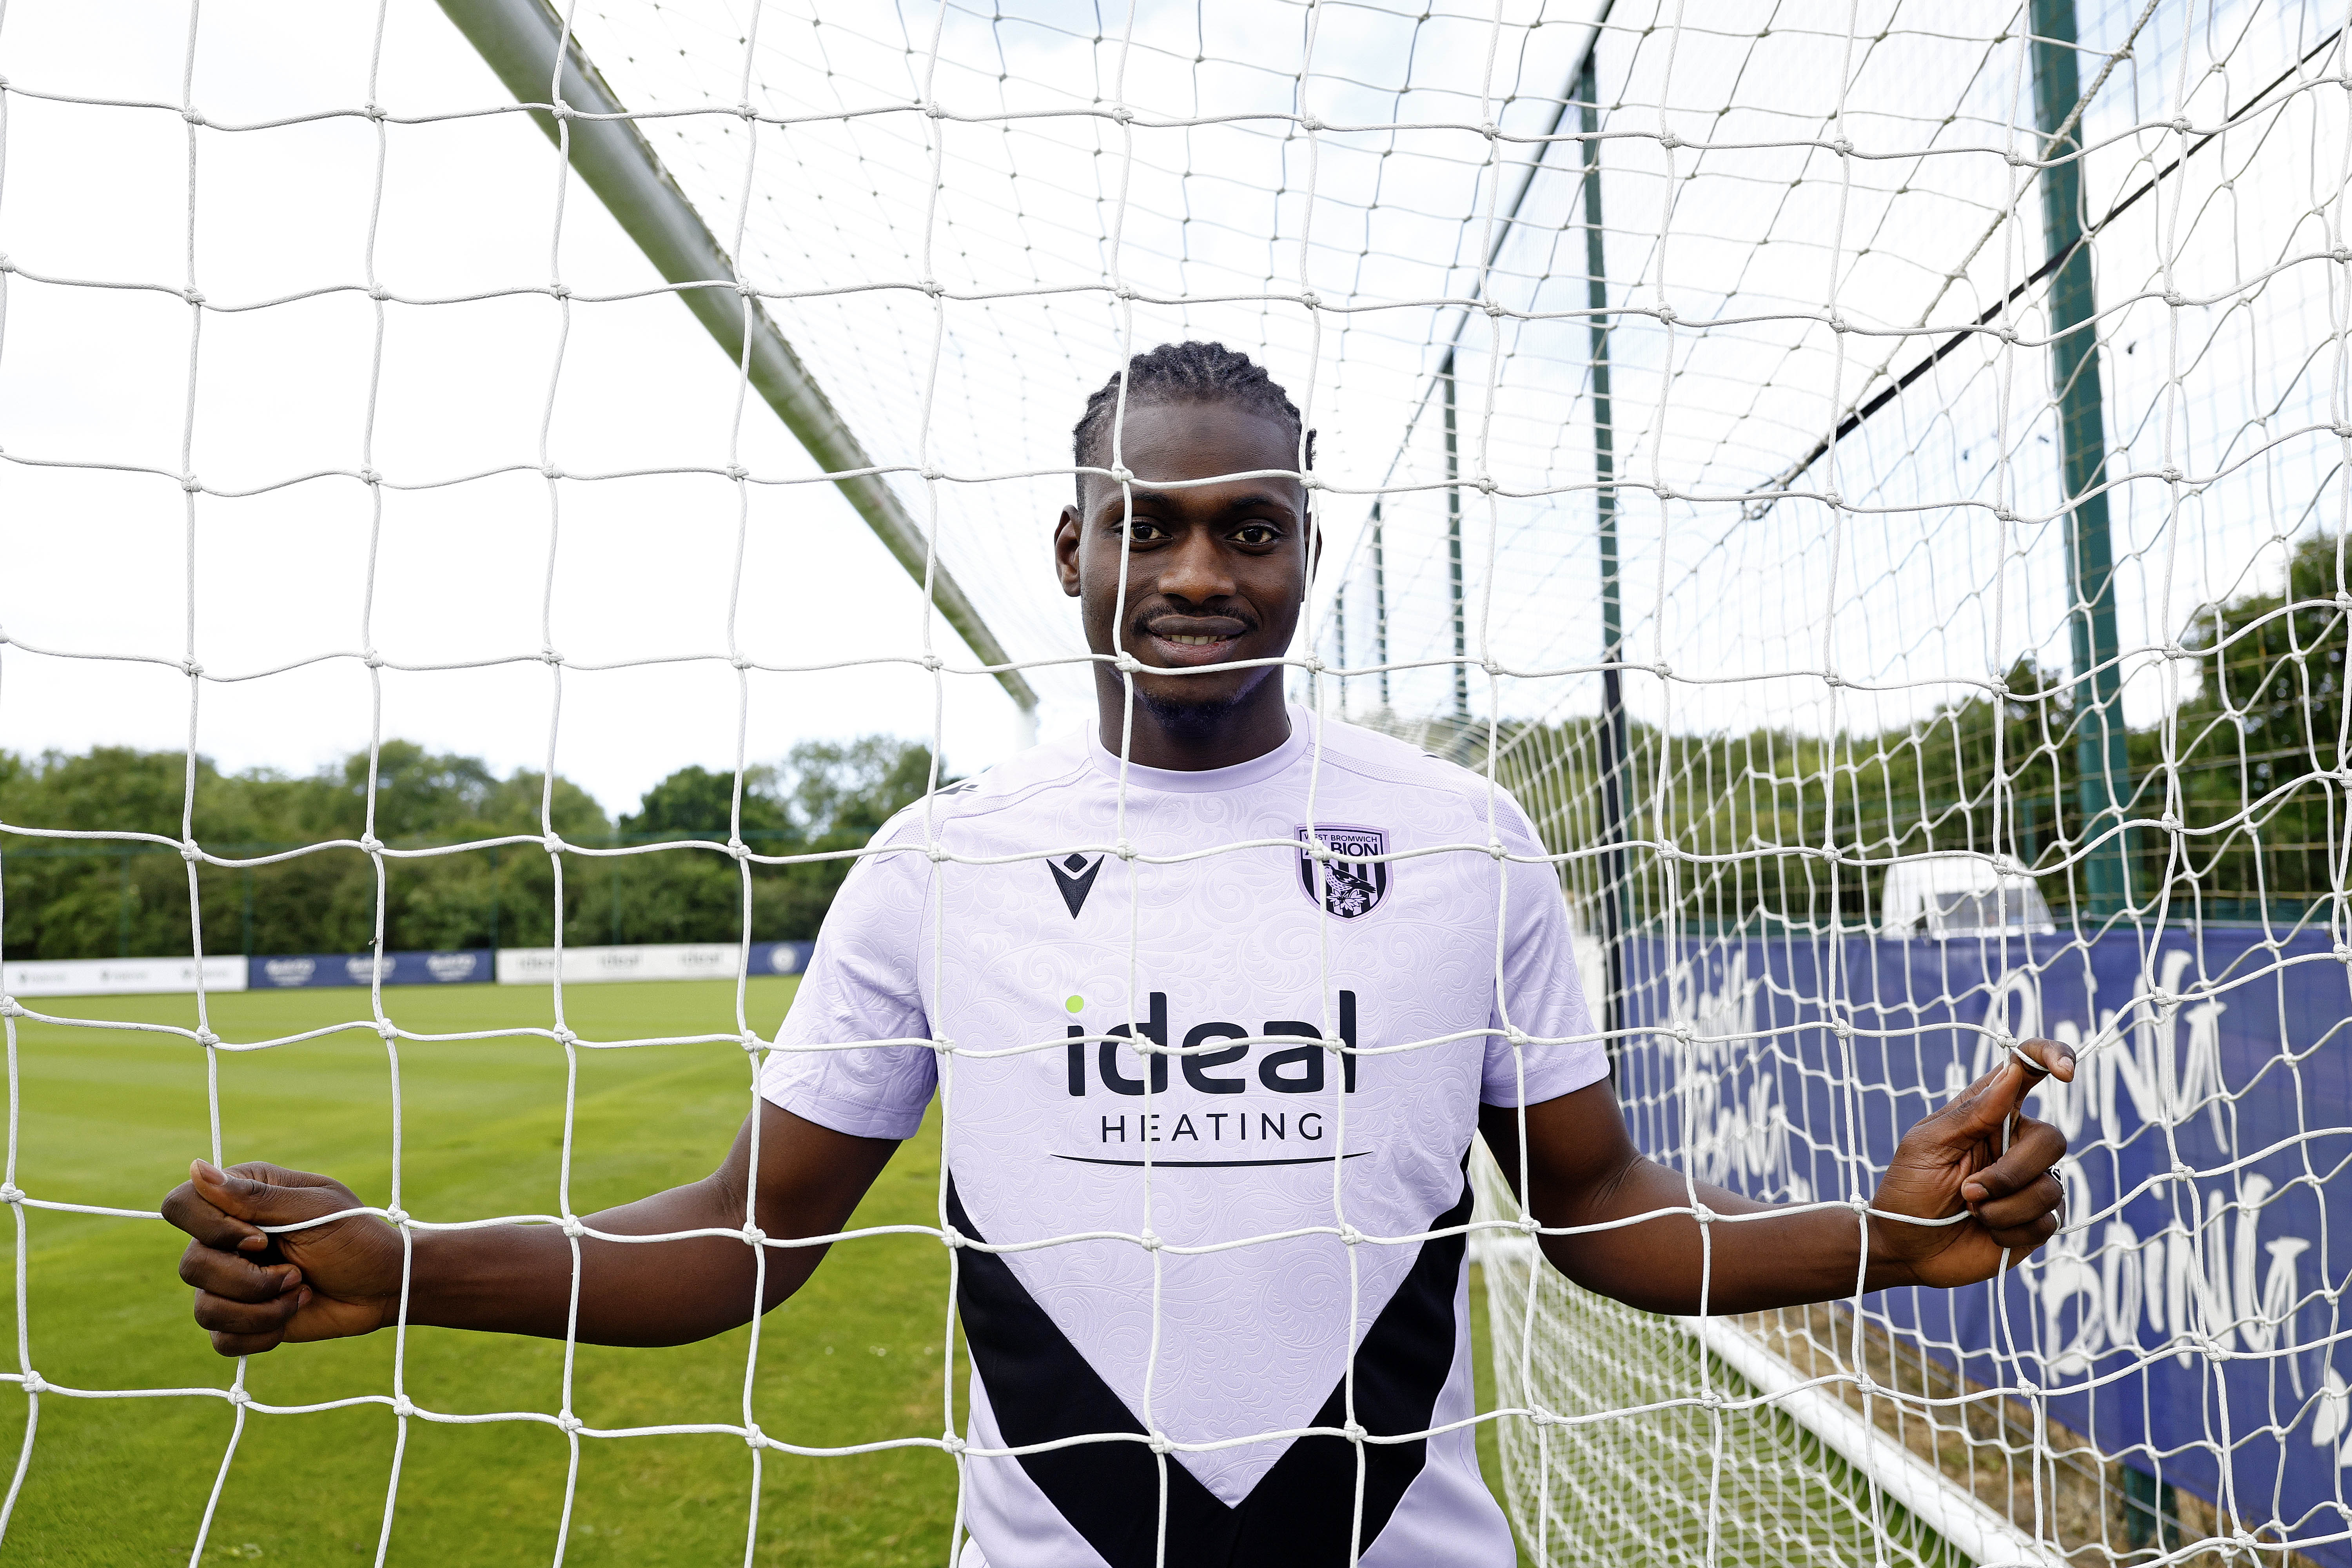 Ousmane Diakité smiling at the camera while holding on to a goal net